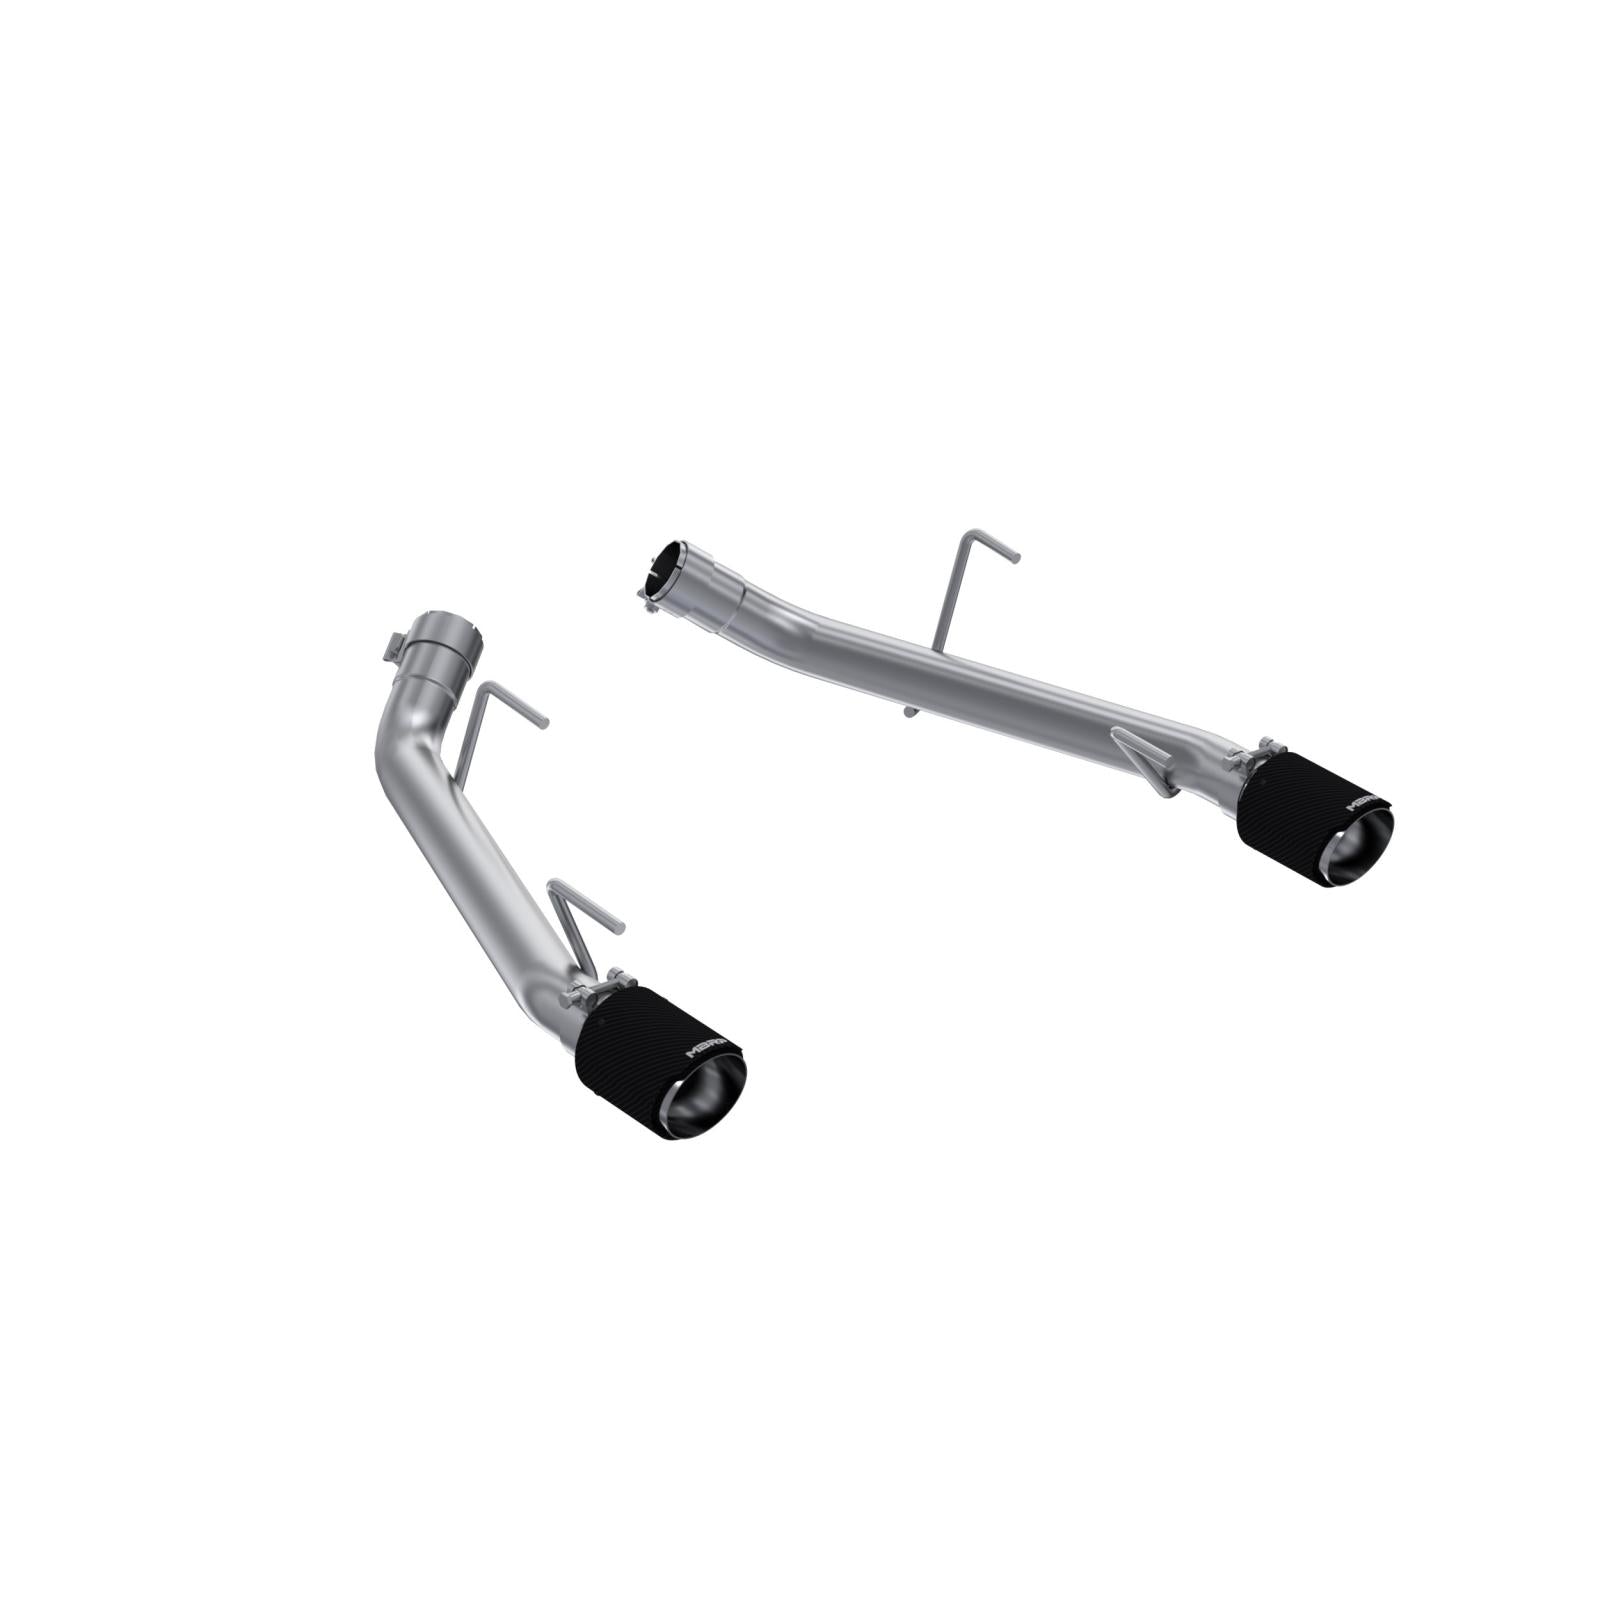 MBRP Exhaust 2005-2010 Ford Mustang GT 4.6L/ 2007-2010 Ford Mustang GT500 5.4L, T304 Stainless Steel 2.5 Inch Axle-Back with Carbon Fiber Tips, Race Version, MBRP S72023CF